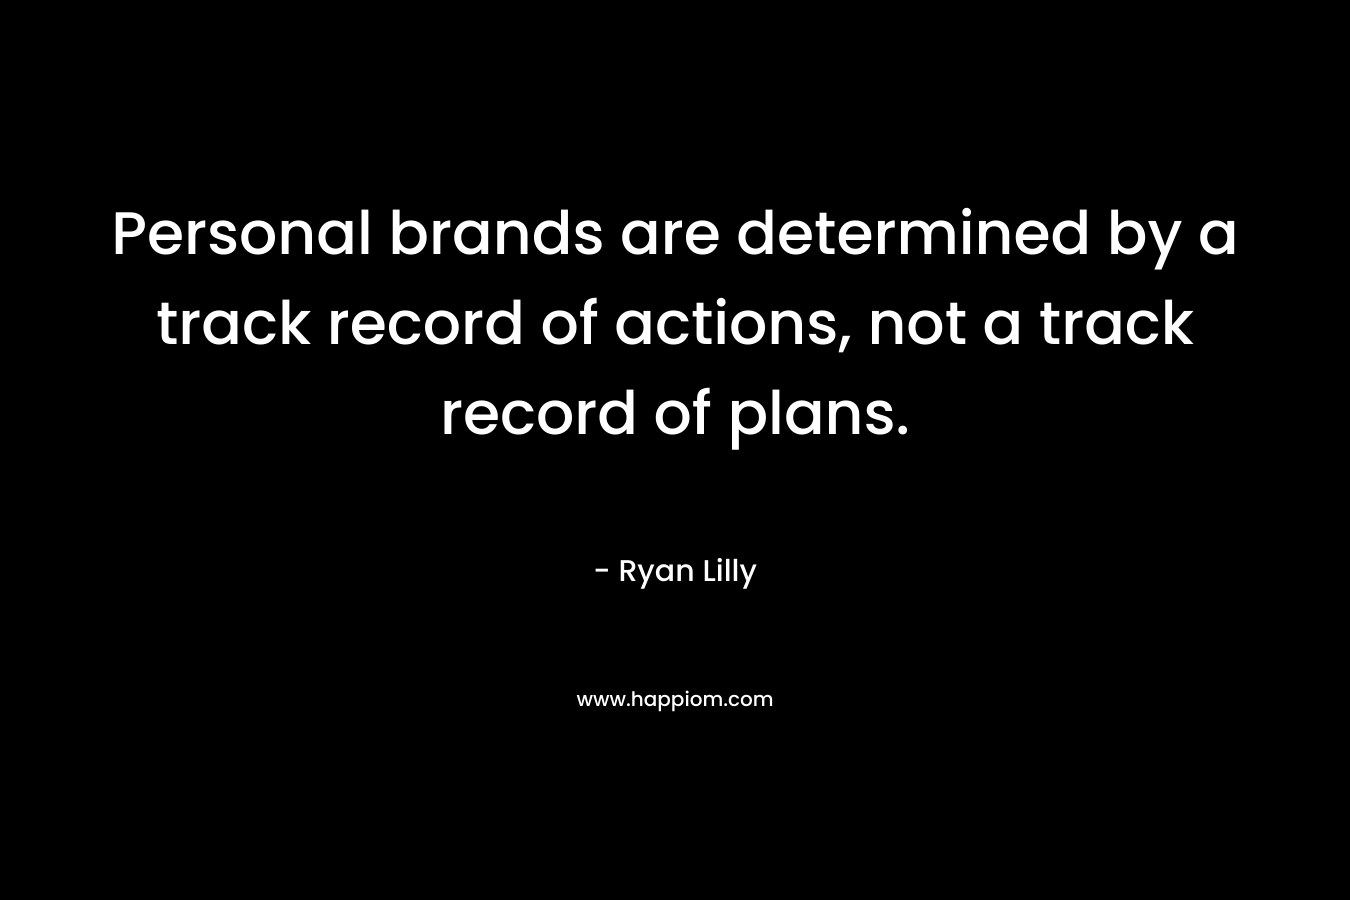 Personal brands are determined by a track record of actions, not a track record of plans. – Ryan Lilly